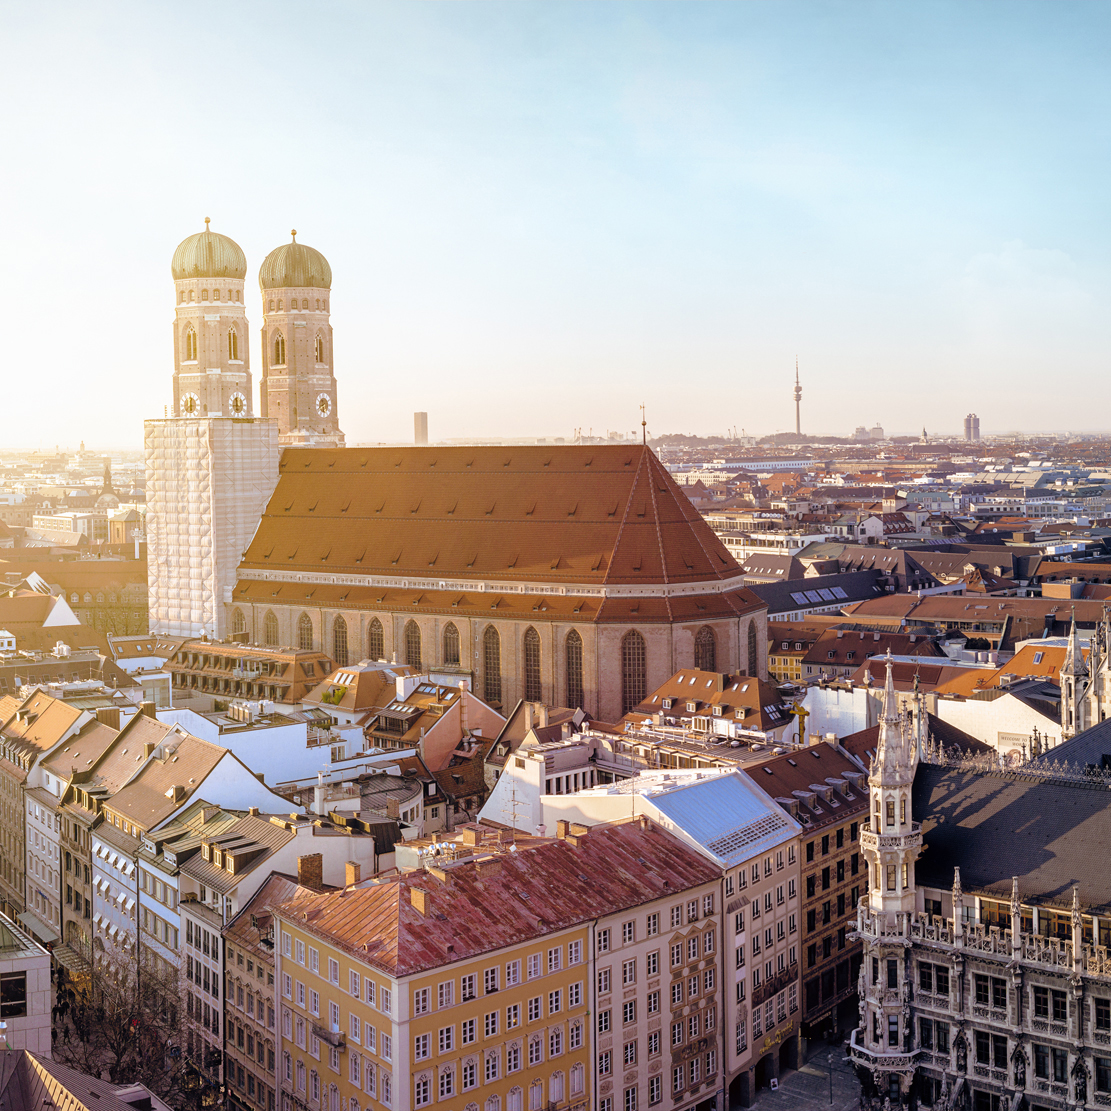 The image shows the Frauenkirche in Munich and the surrounding city.